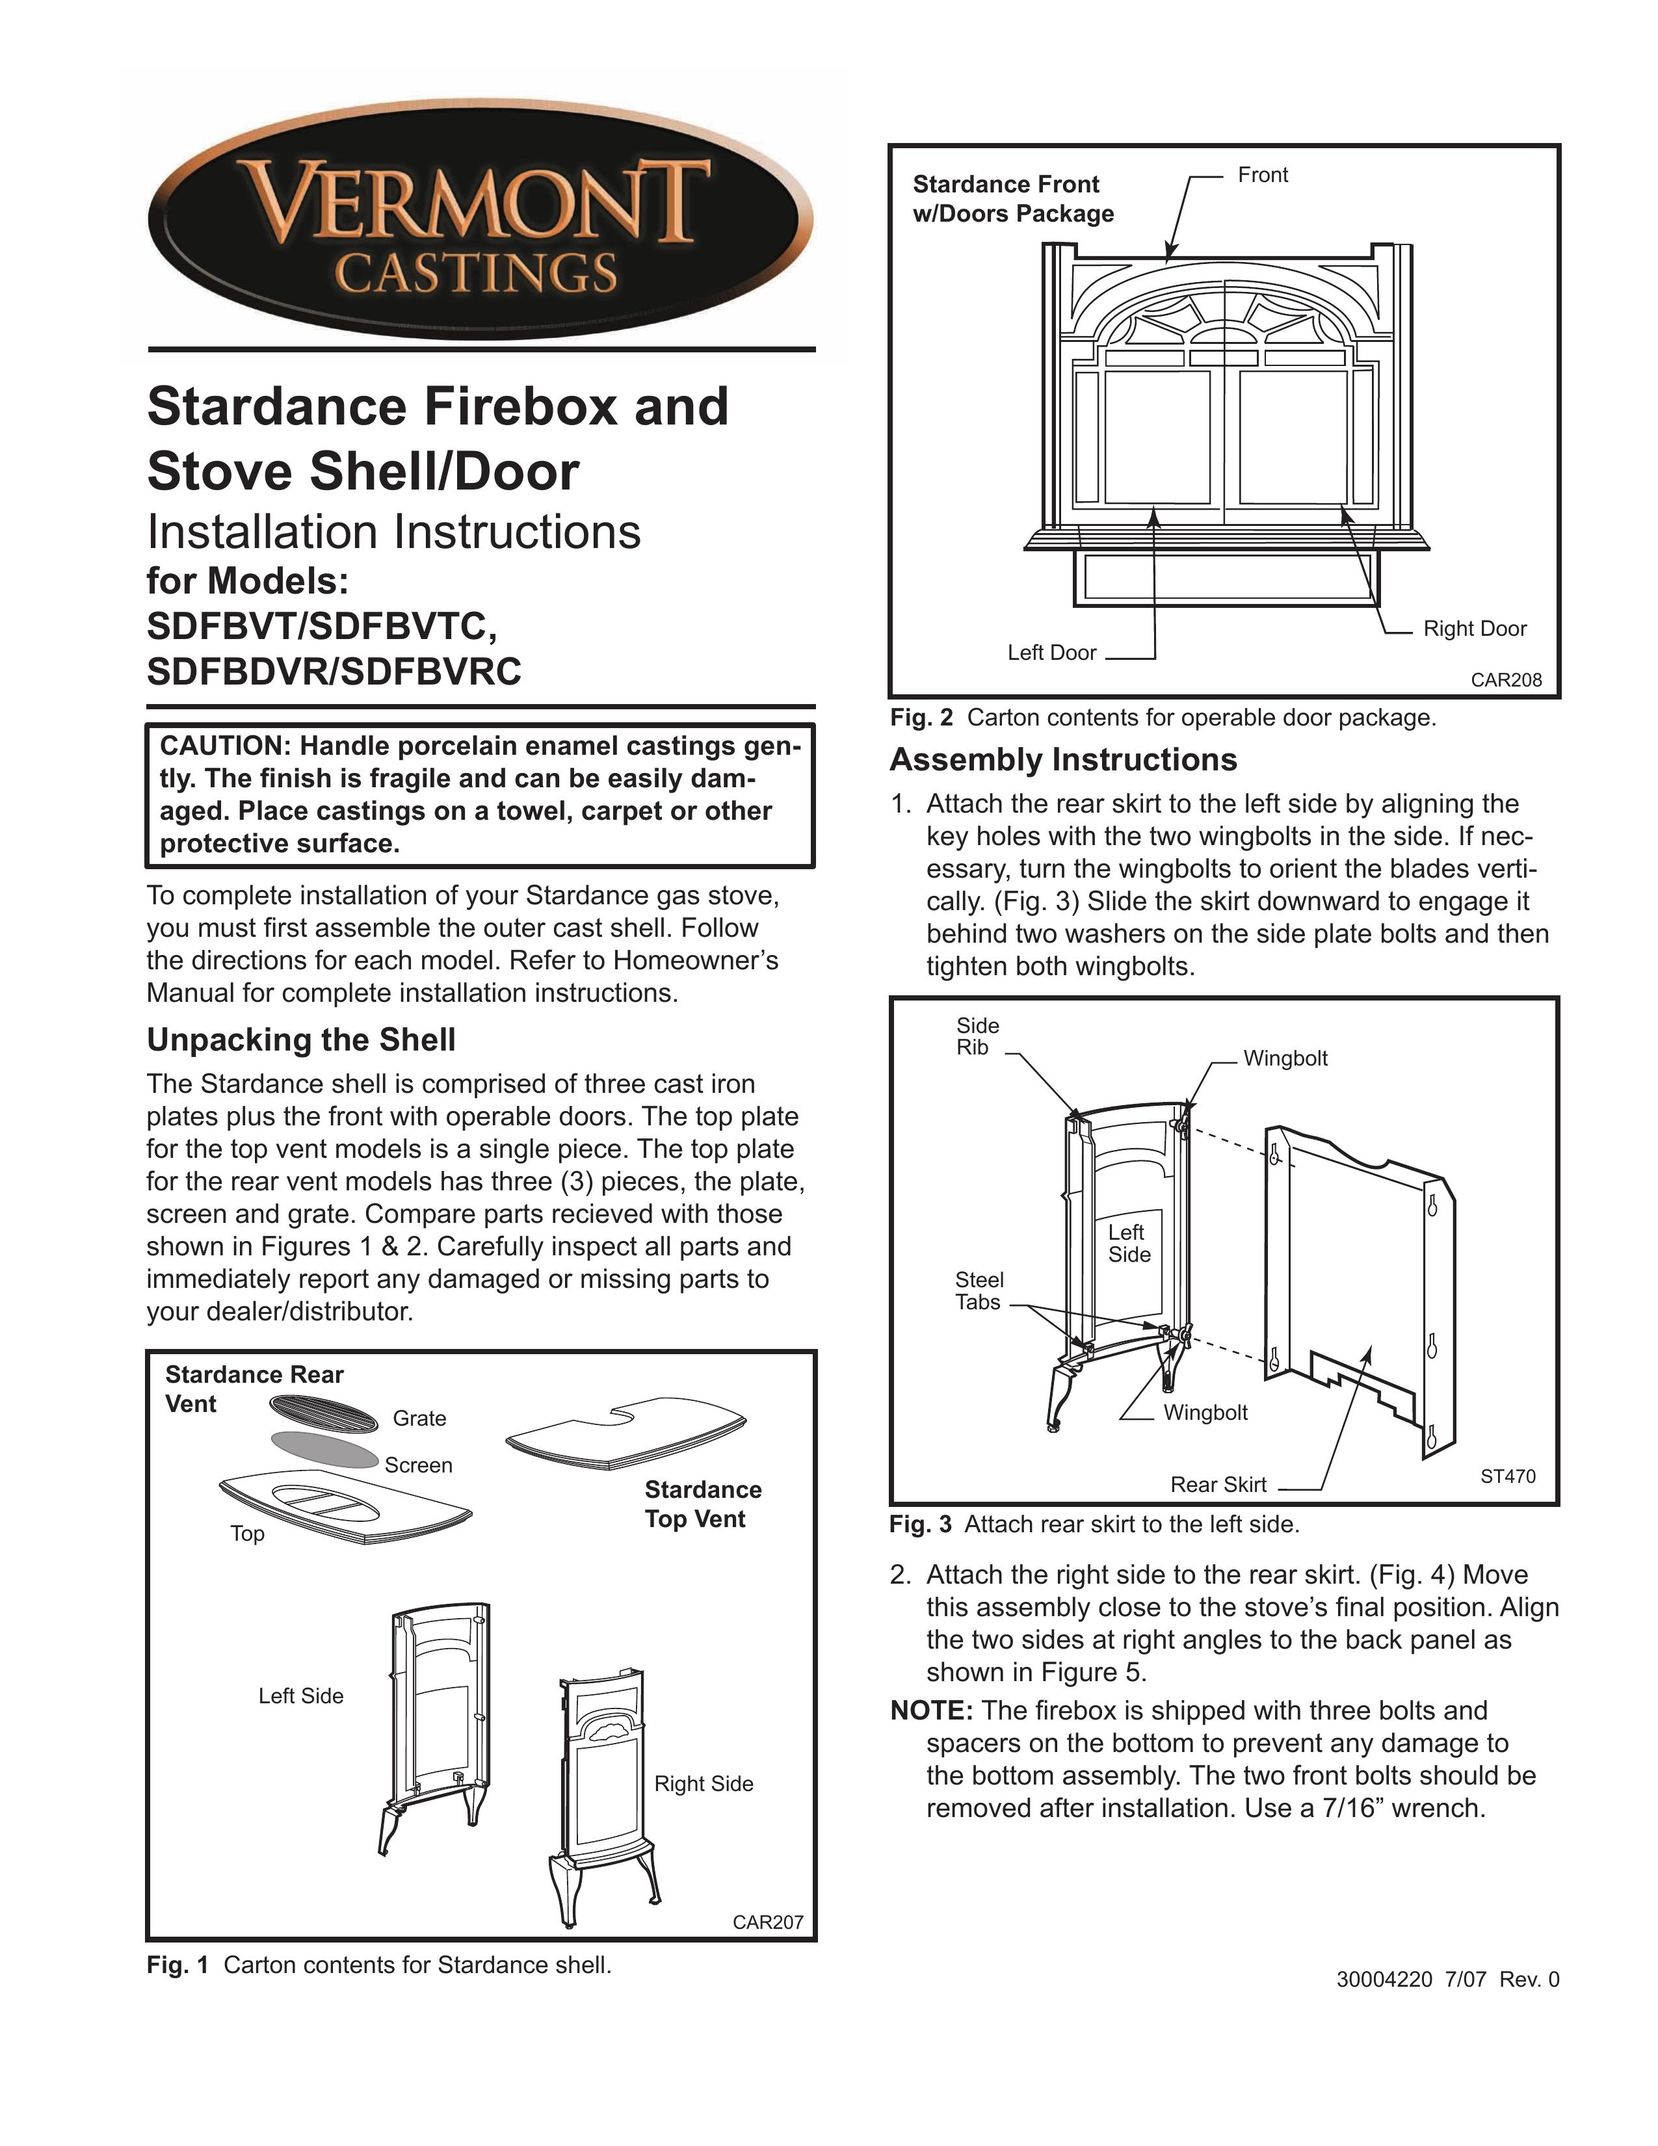 Vermont Casting SDFBVT Stove User Manual